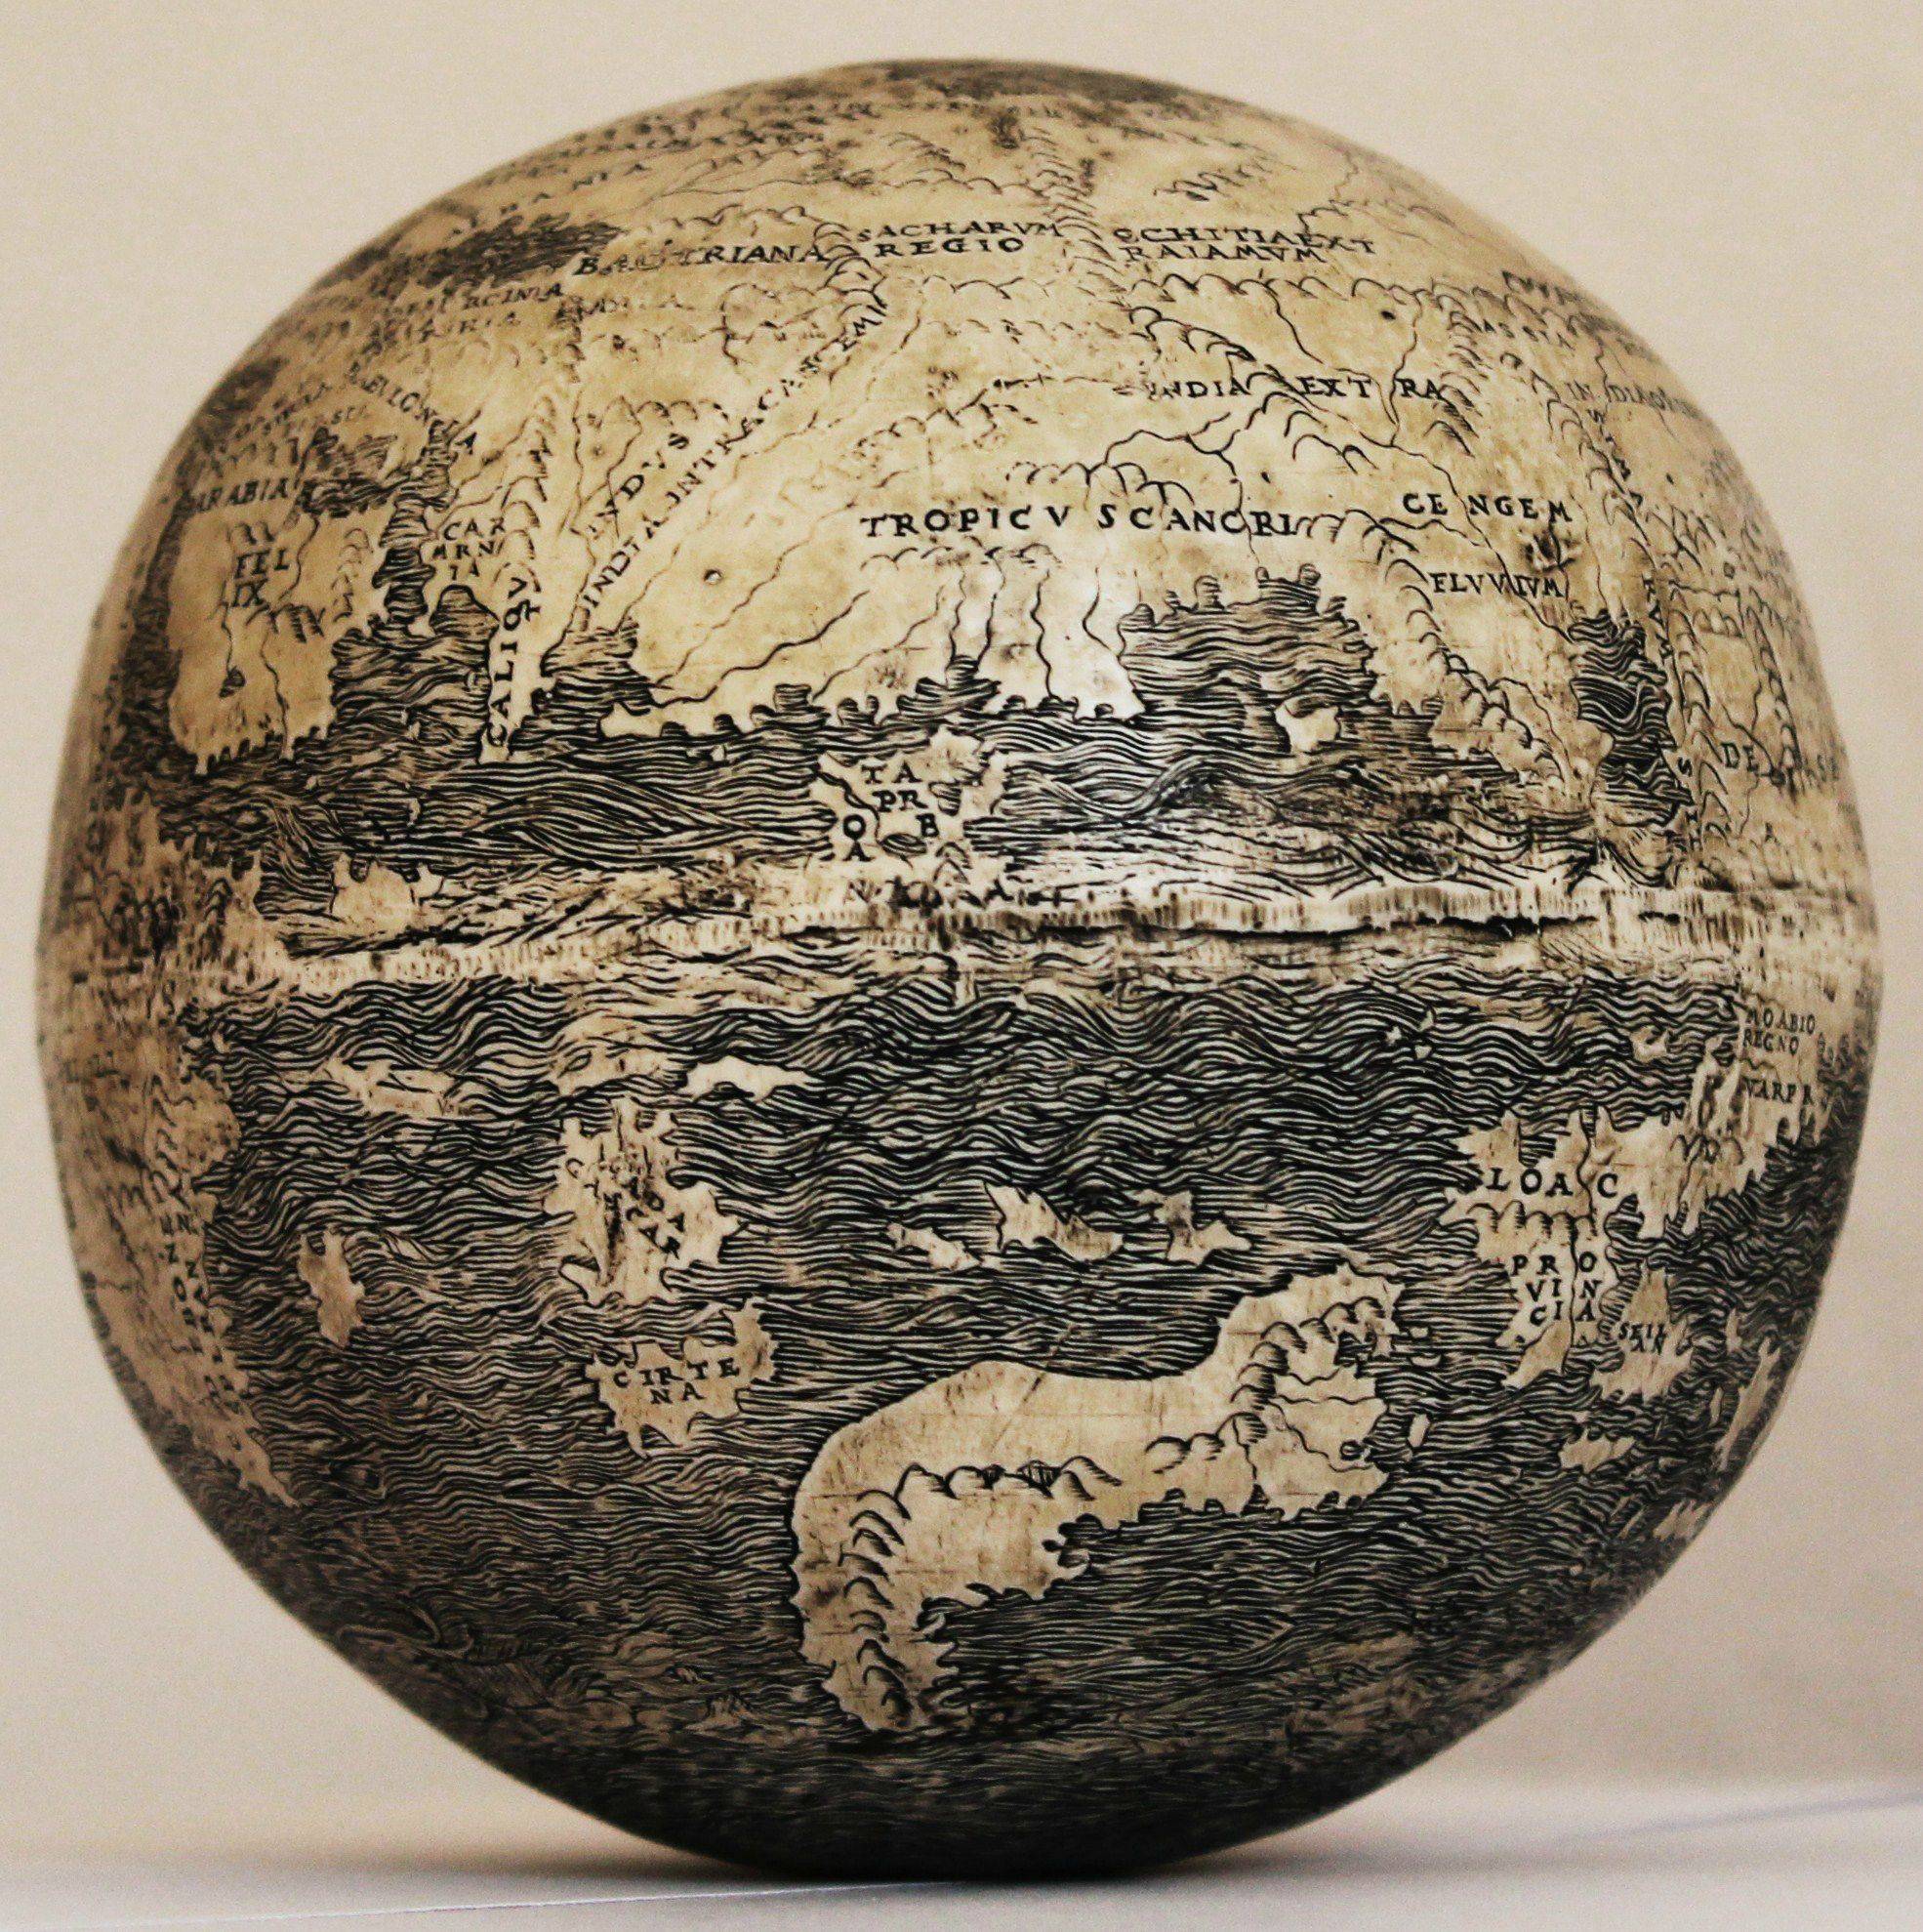 Oldest map of the New World, C.1504 AD, engraved on a 500 year old ostrich 
egg.